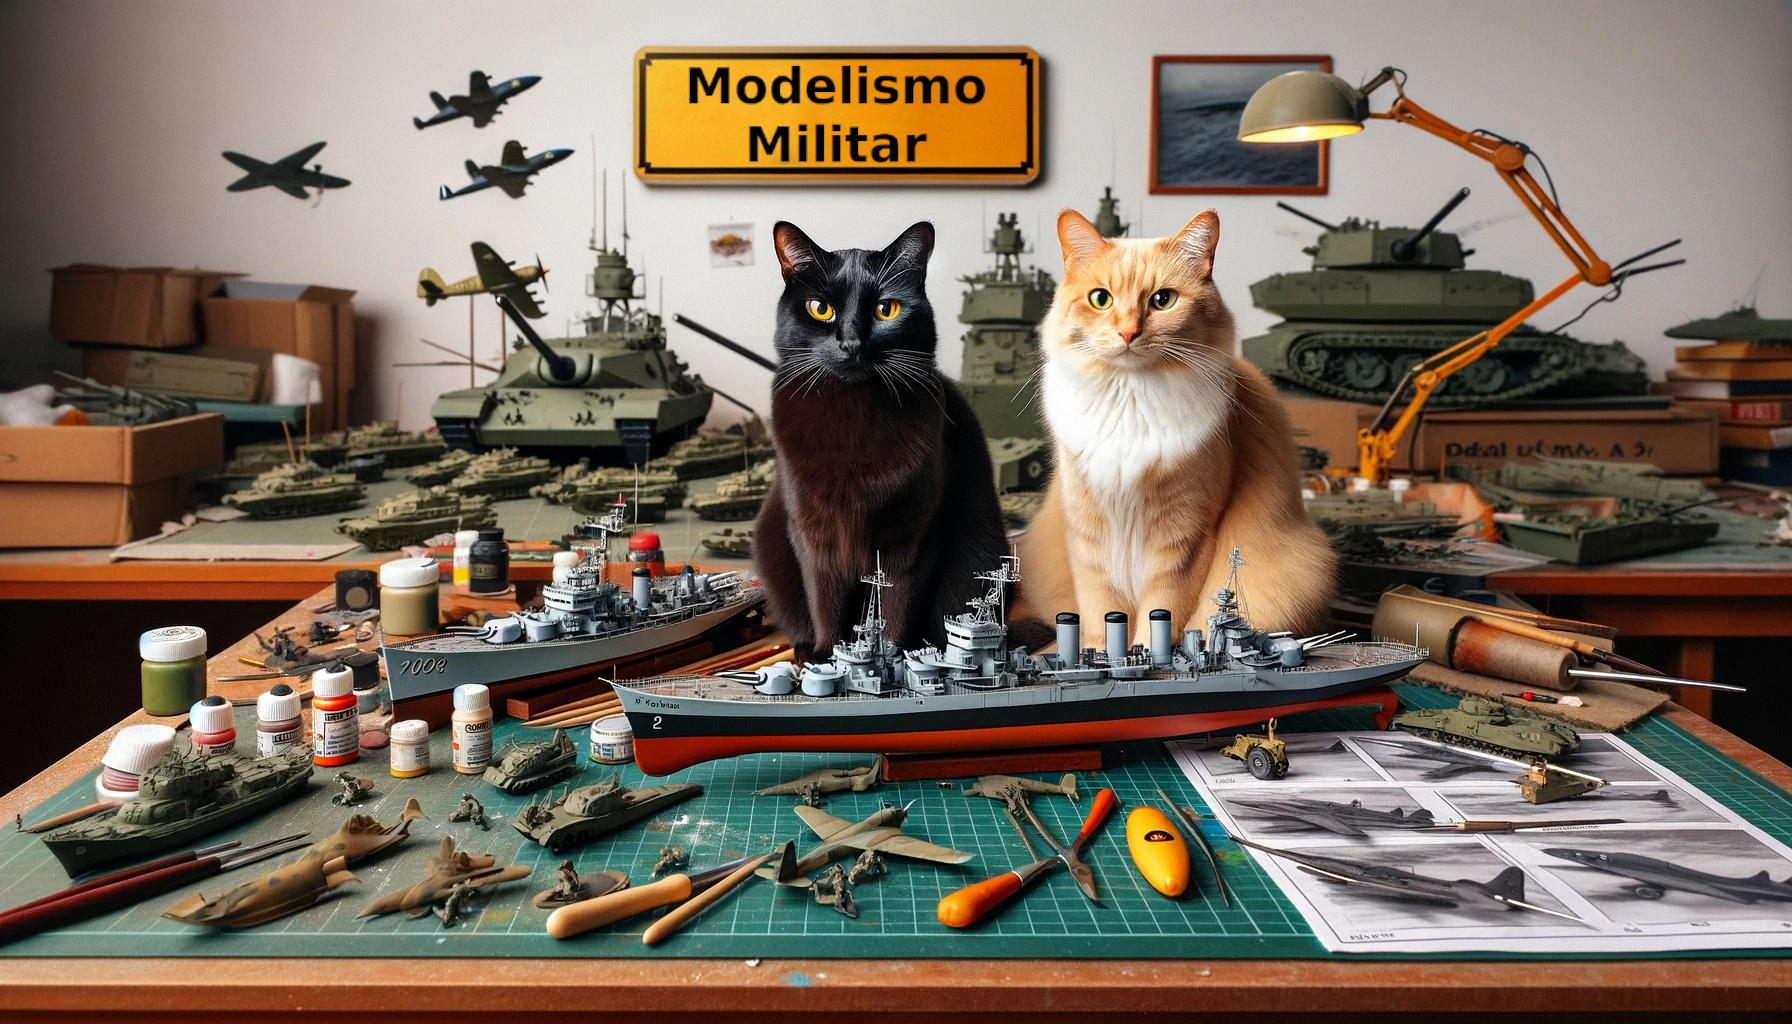 Four-Legged Generals: Kiko and Pituska in Command of Military Modeling